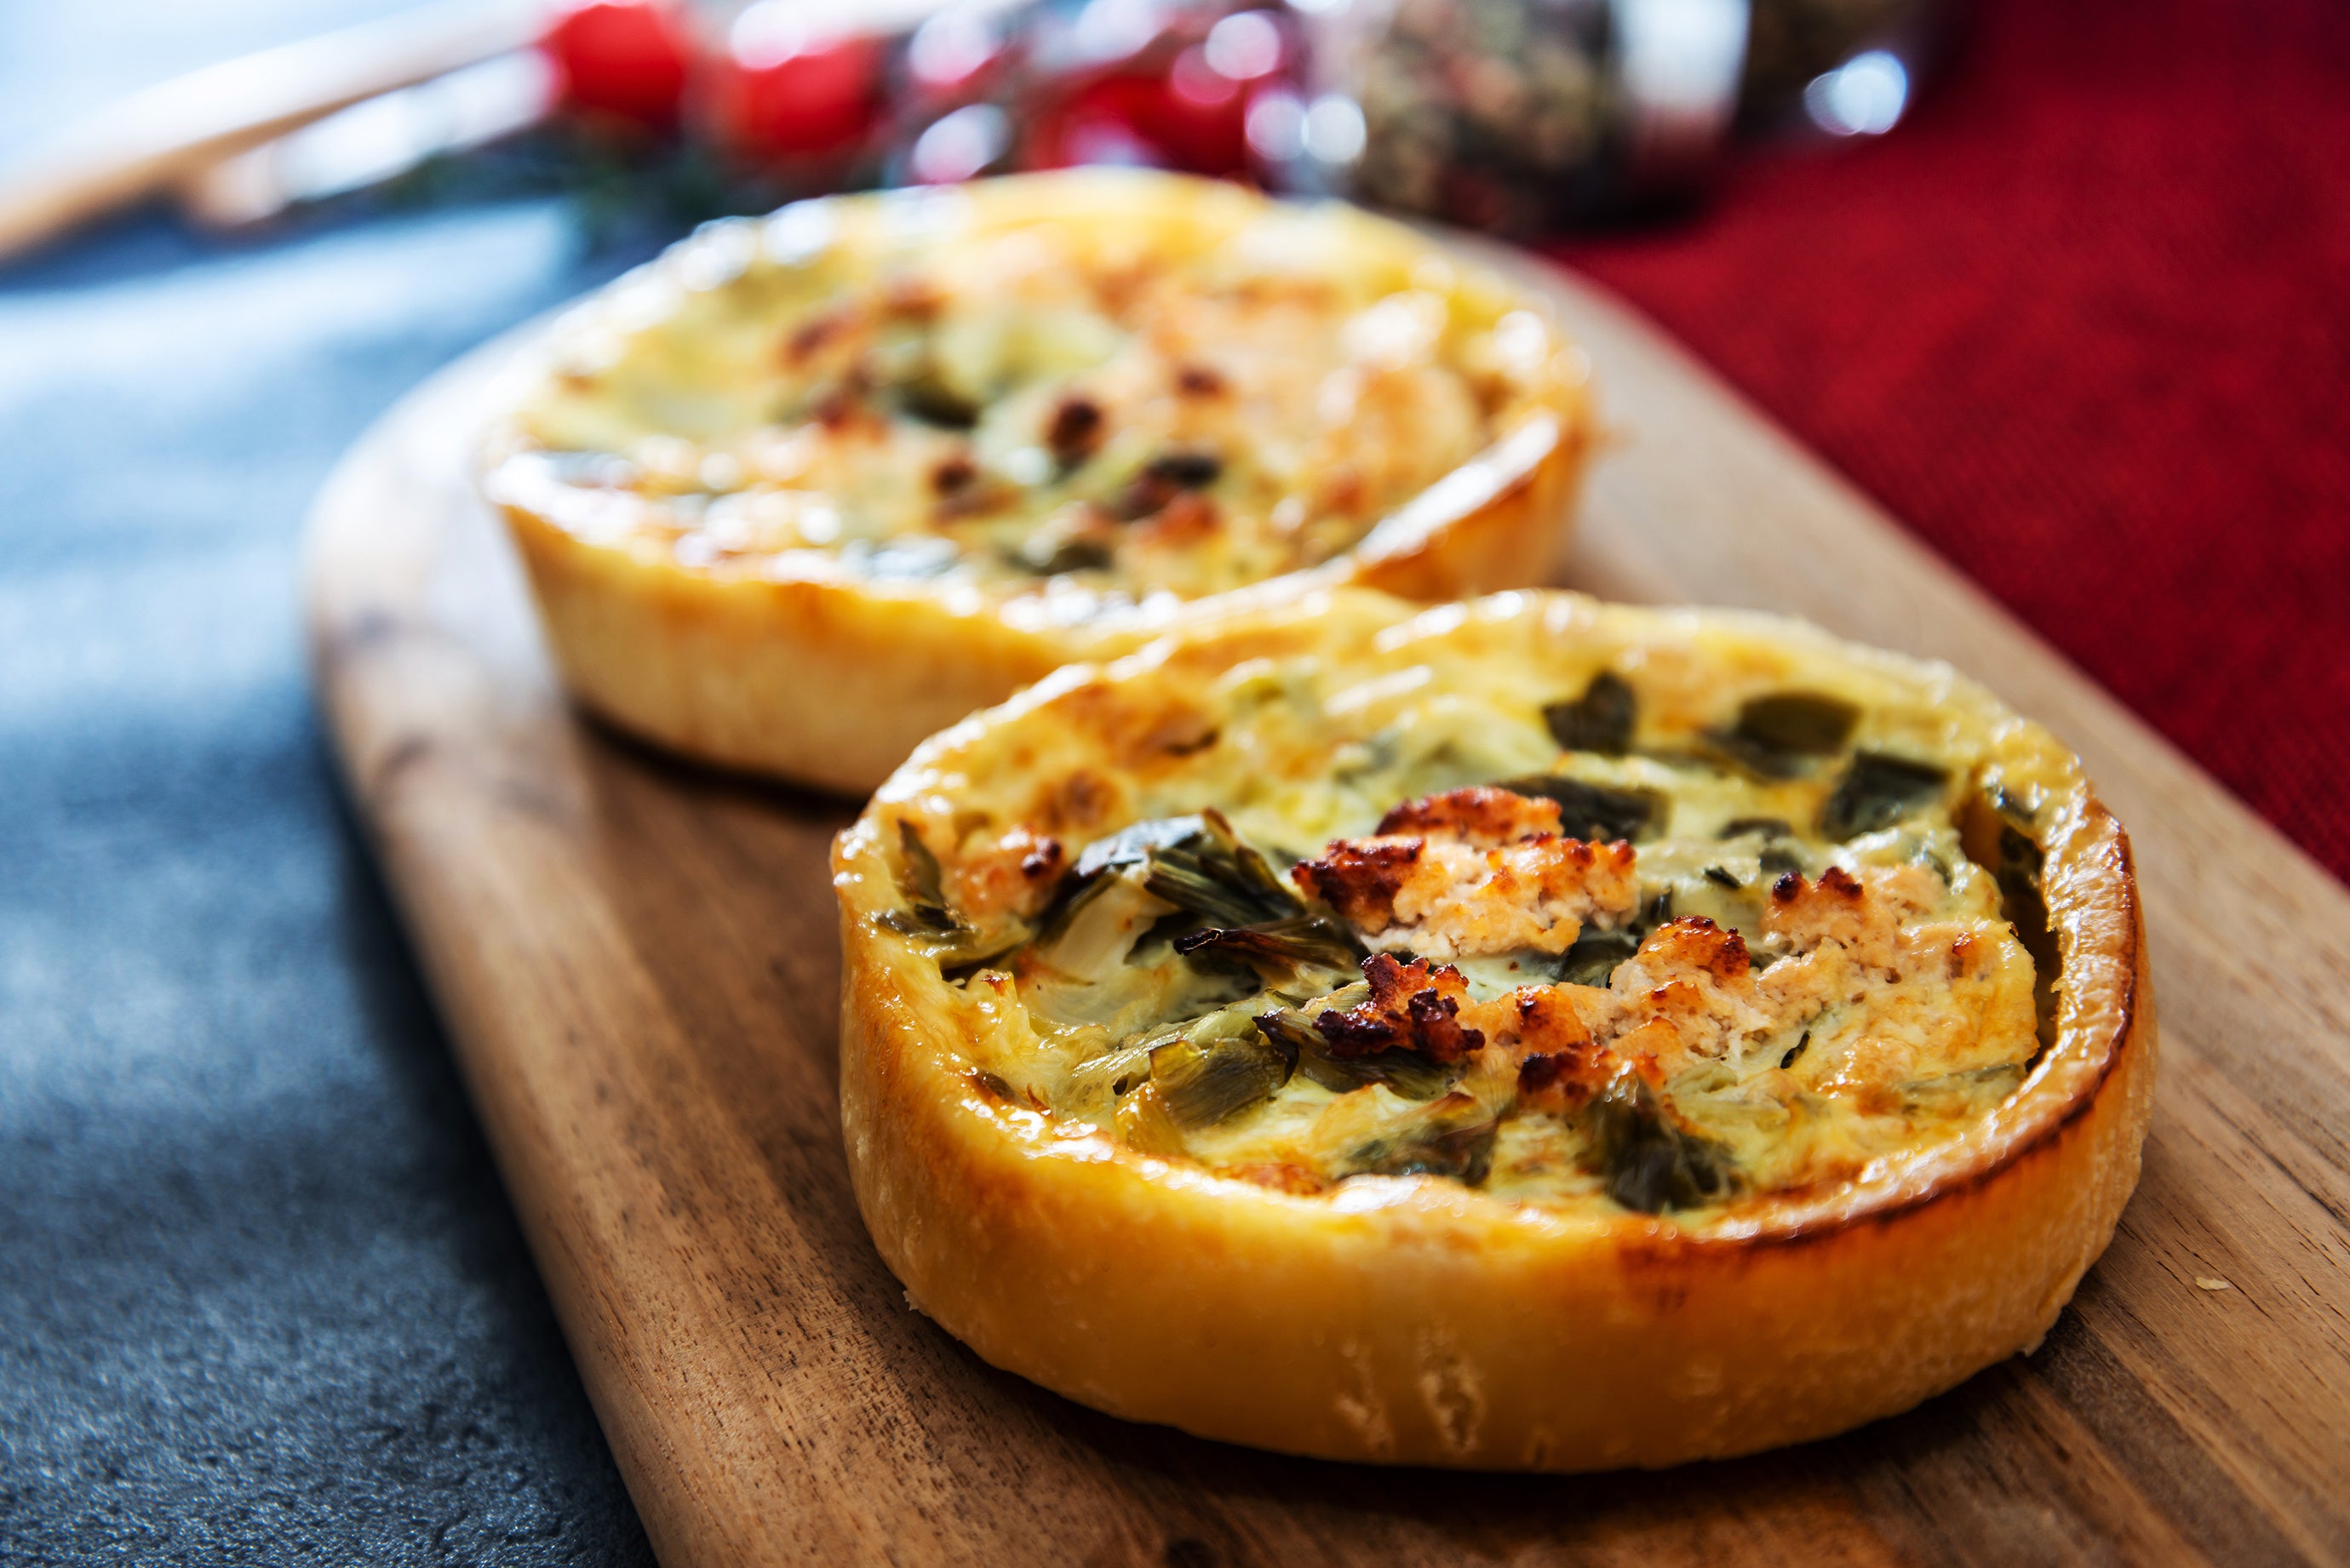 Quiche is a savory pie made with a pastry crust, eggs, cheese, and various fillings such as leeks, mushrooms, and bacon. 